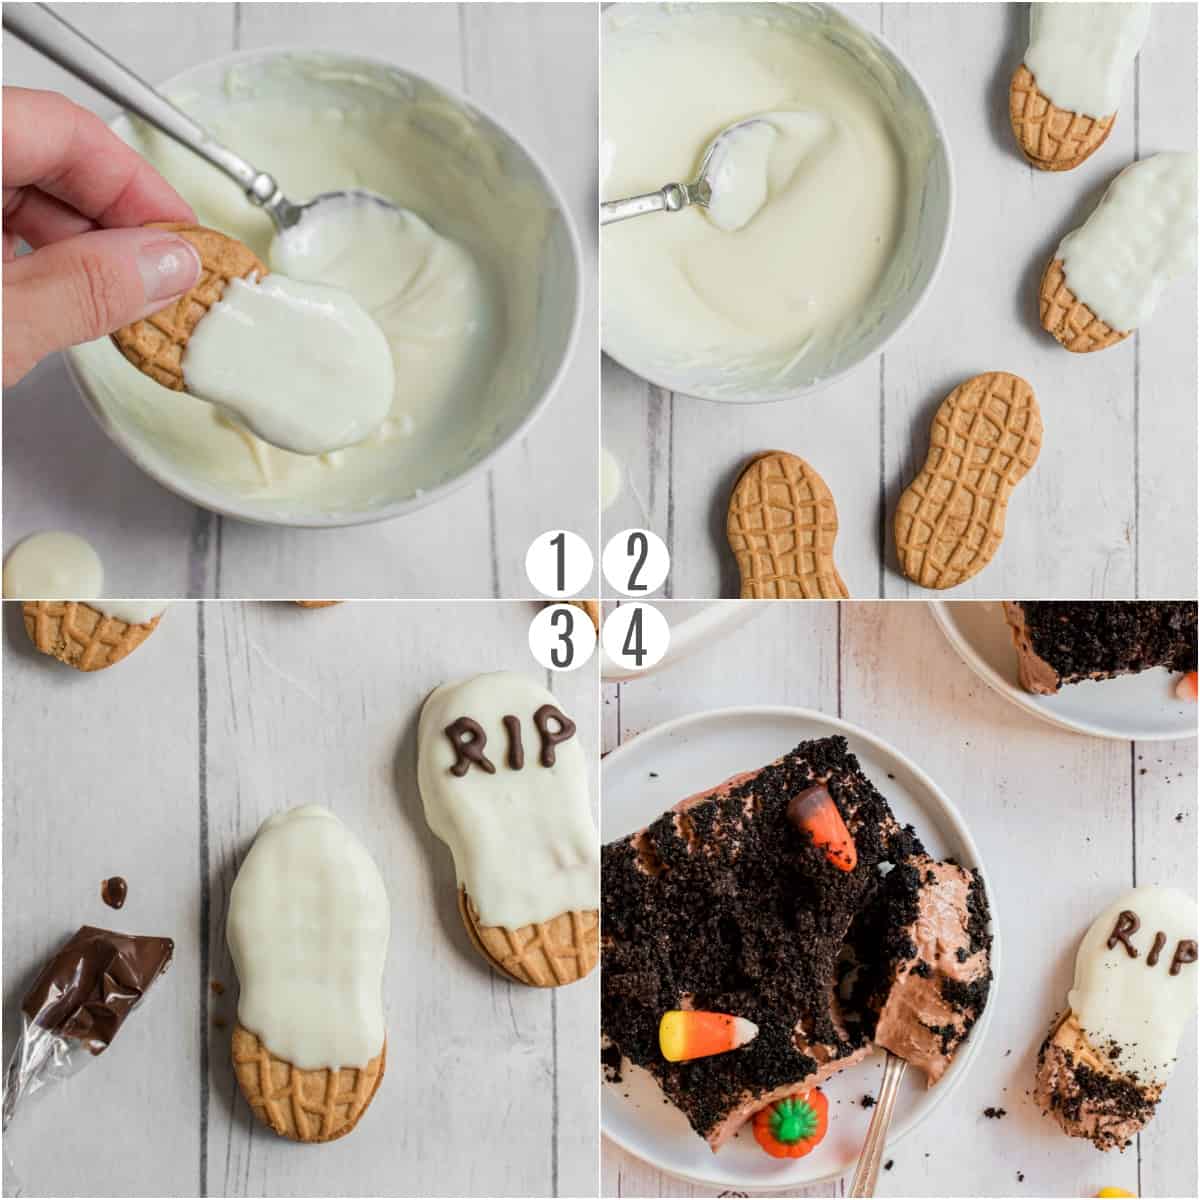 Step by step photos showing how to make tombstones with nutter butter cookies for dirt dessert.